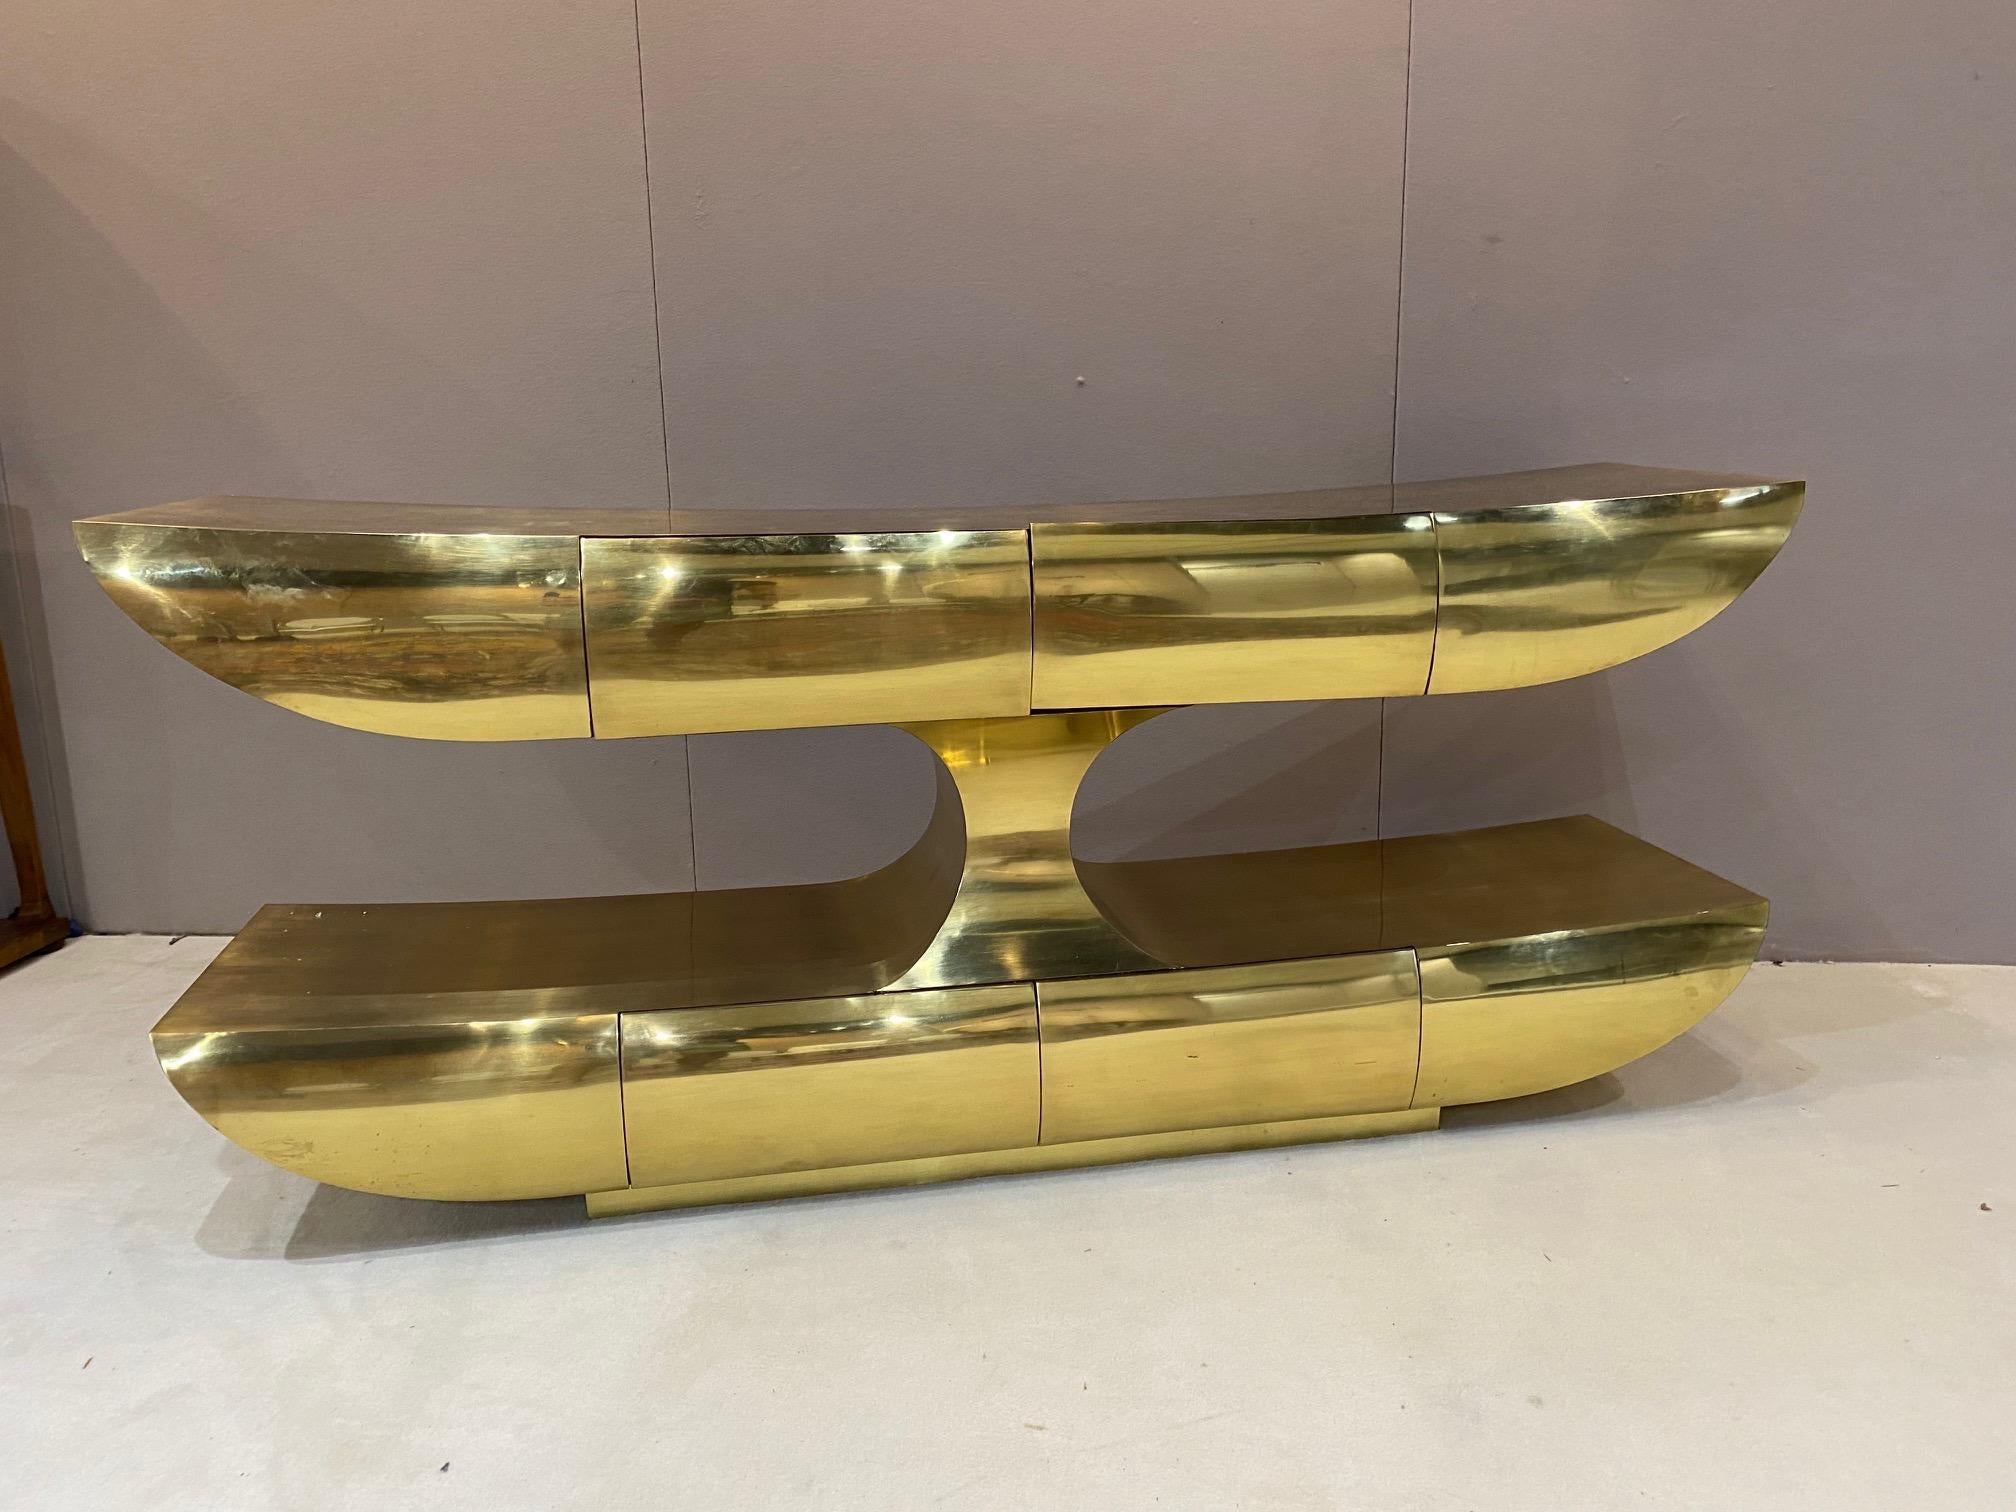 Rare brass console. Brass clad with highest quality Italian craftsmanship. Mahogany elements. Drawers are finished all around in typical Italian high style manufacturing. Measures: 78 1/2 inches long by 33 3/4 inches tall by 20 1/2 inches wide.